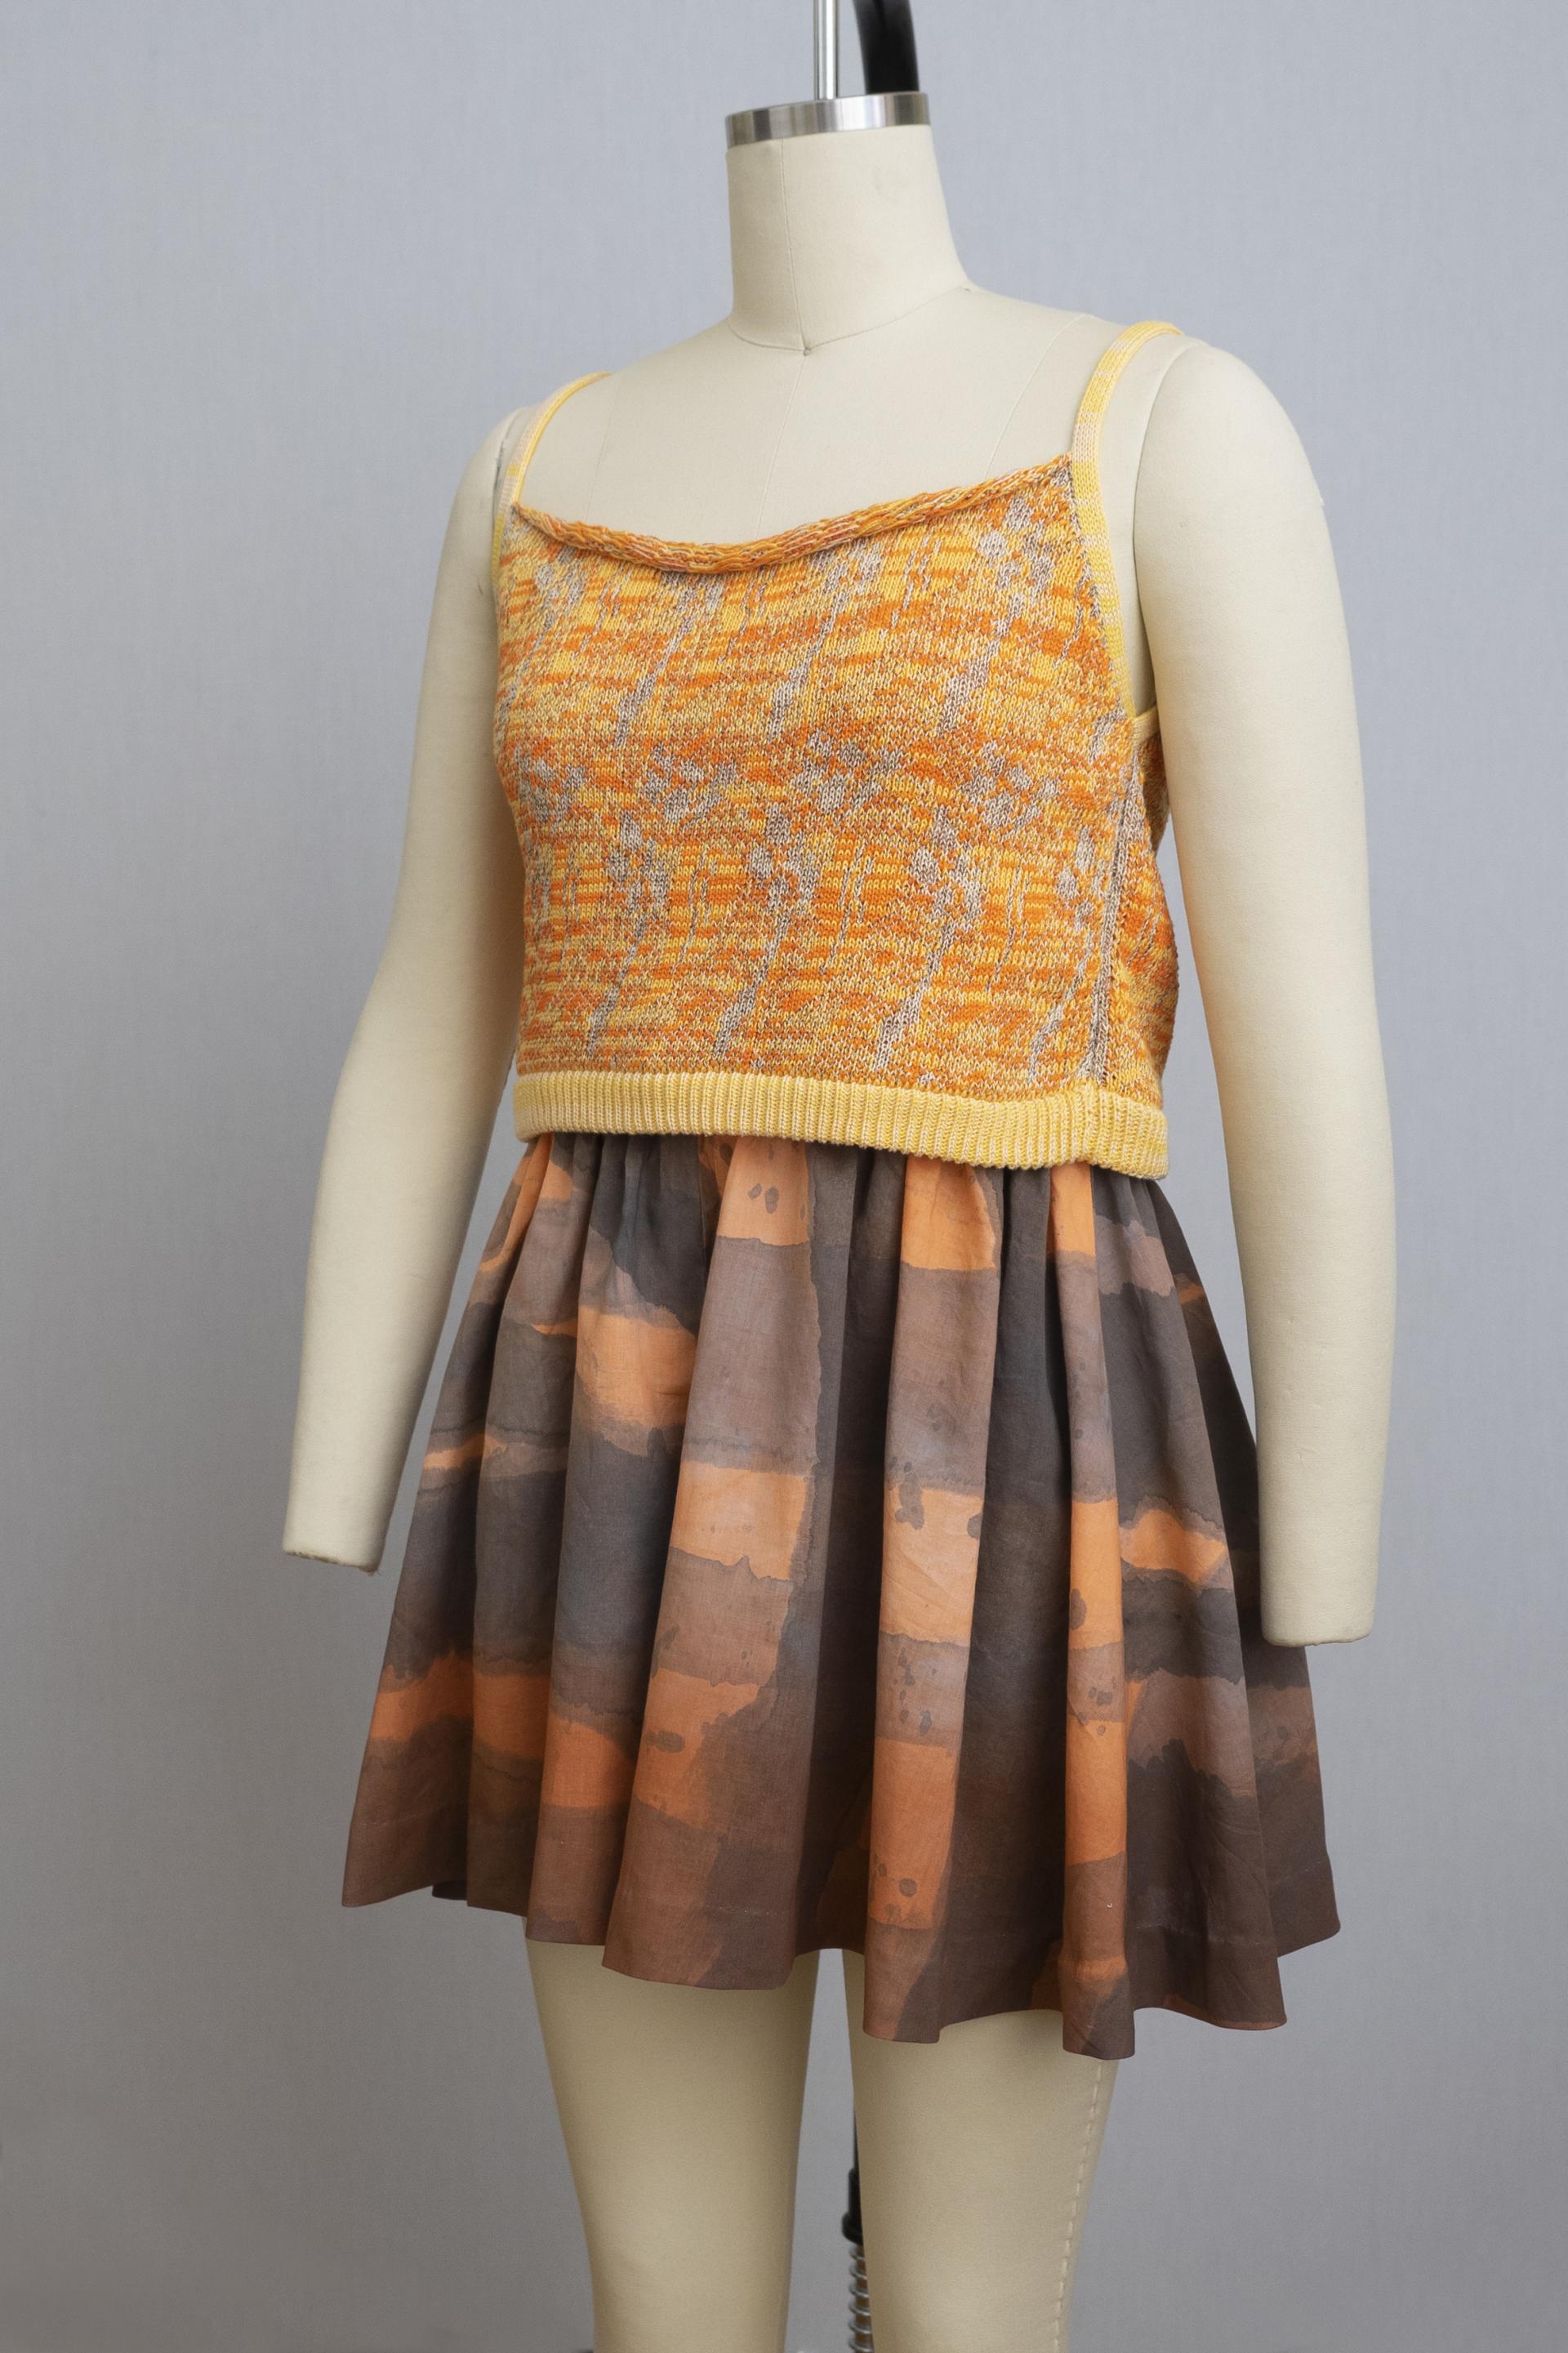 dress form wearing orange and yellow top with wide leg shorts in purple and orange